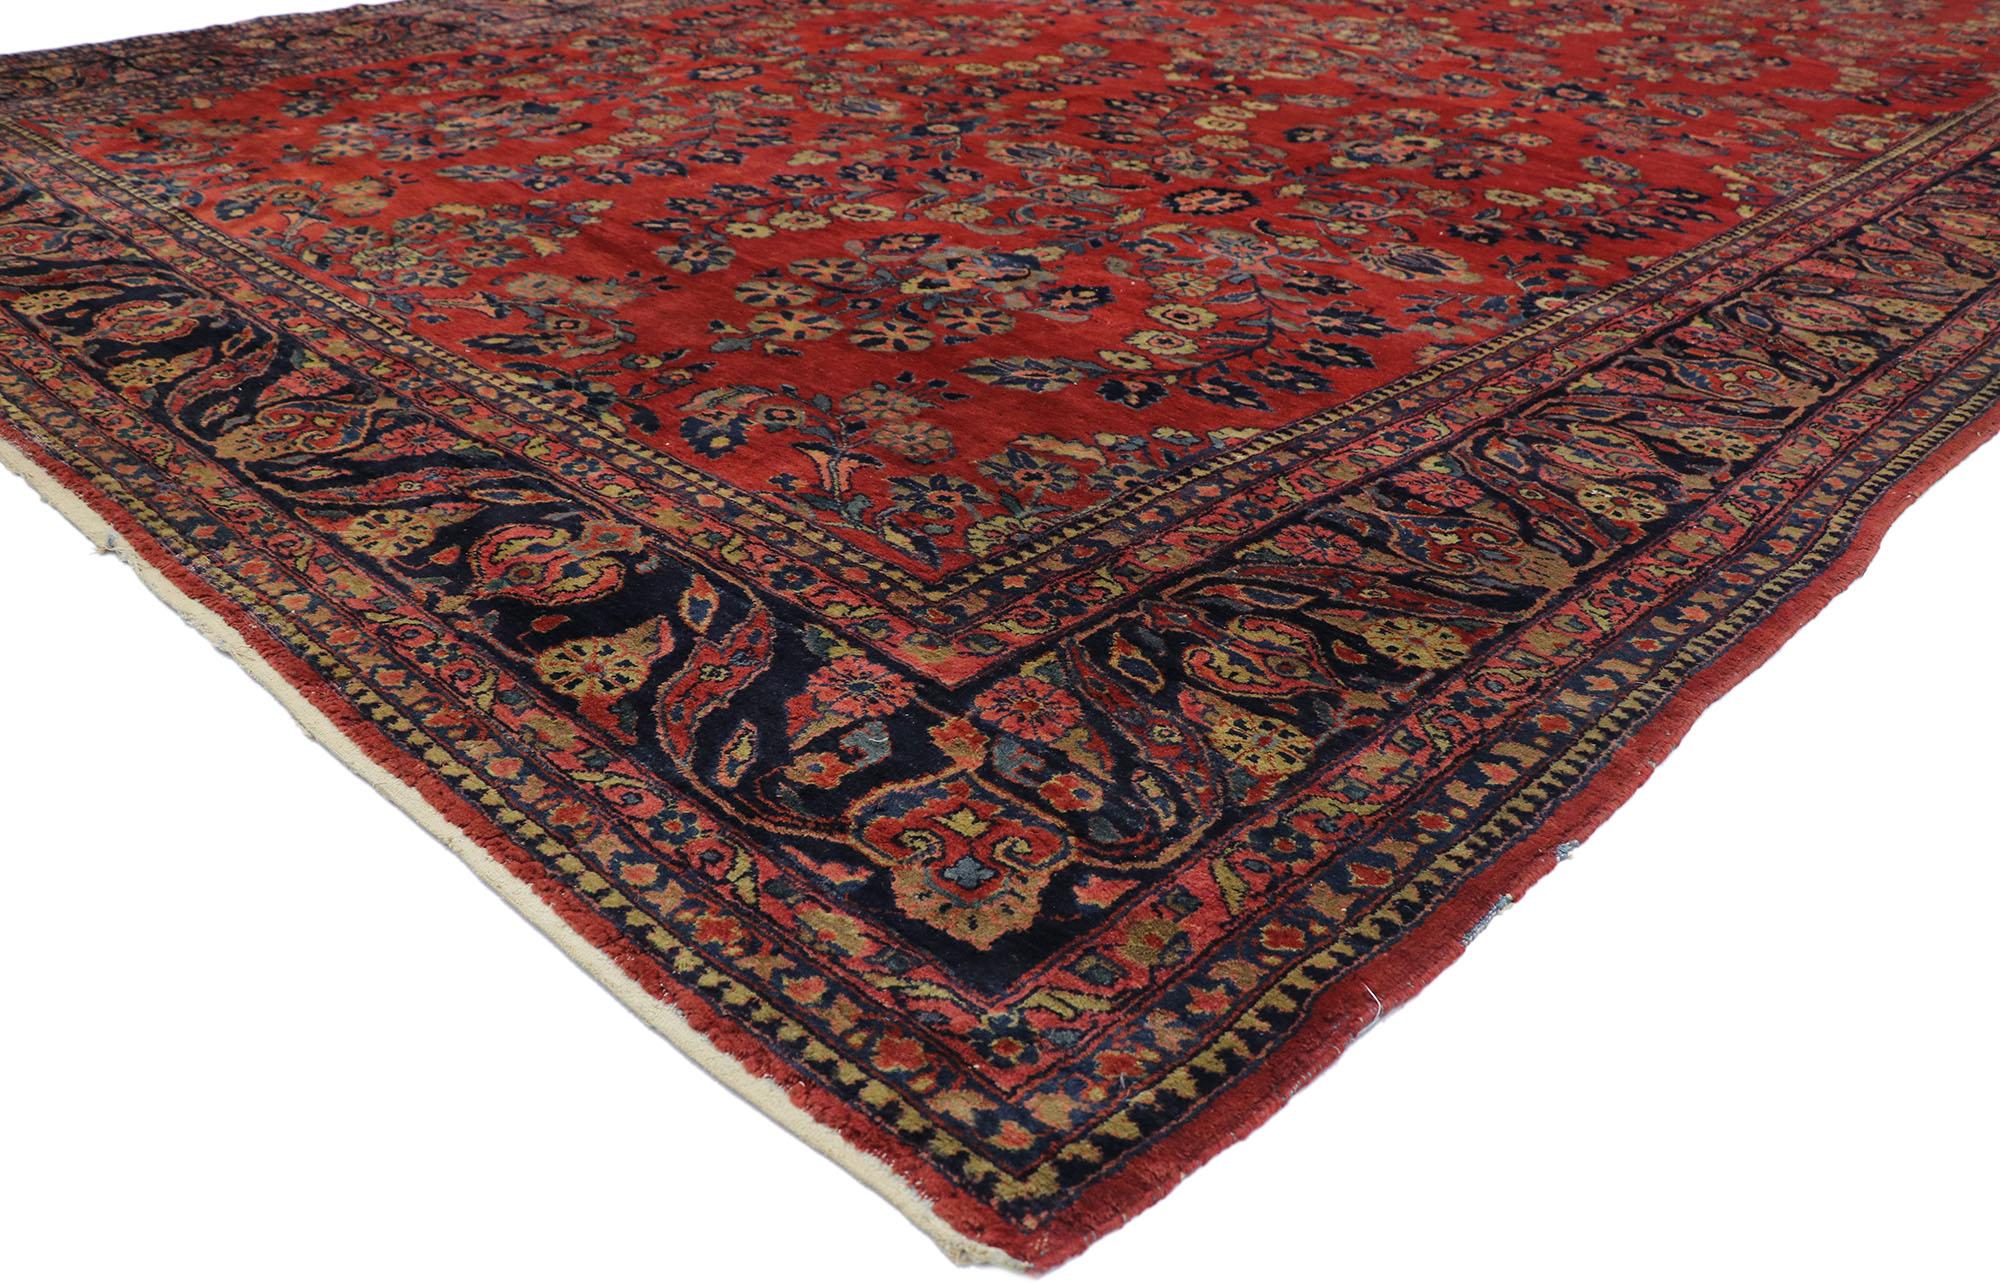 77623, antique Persian Malayer rug with Sarouk Design and Neoclassical style. With timeless floral design and a traditional color palette, this hand knotted wool antique Persian Malayer rug is a captivating vision of woven beauty. The abrashed ruby